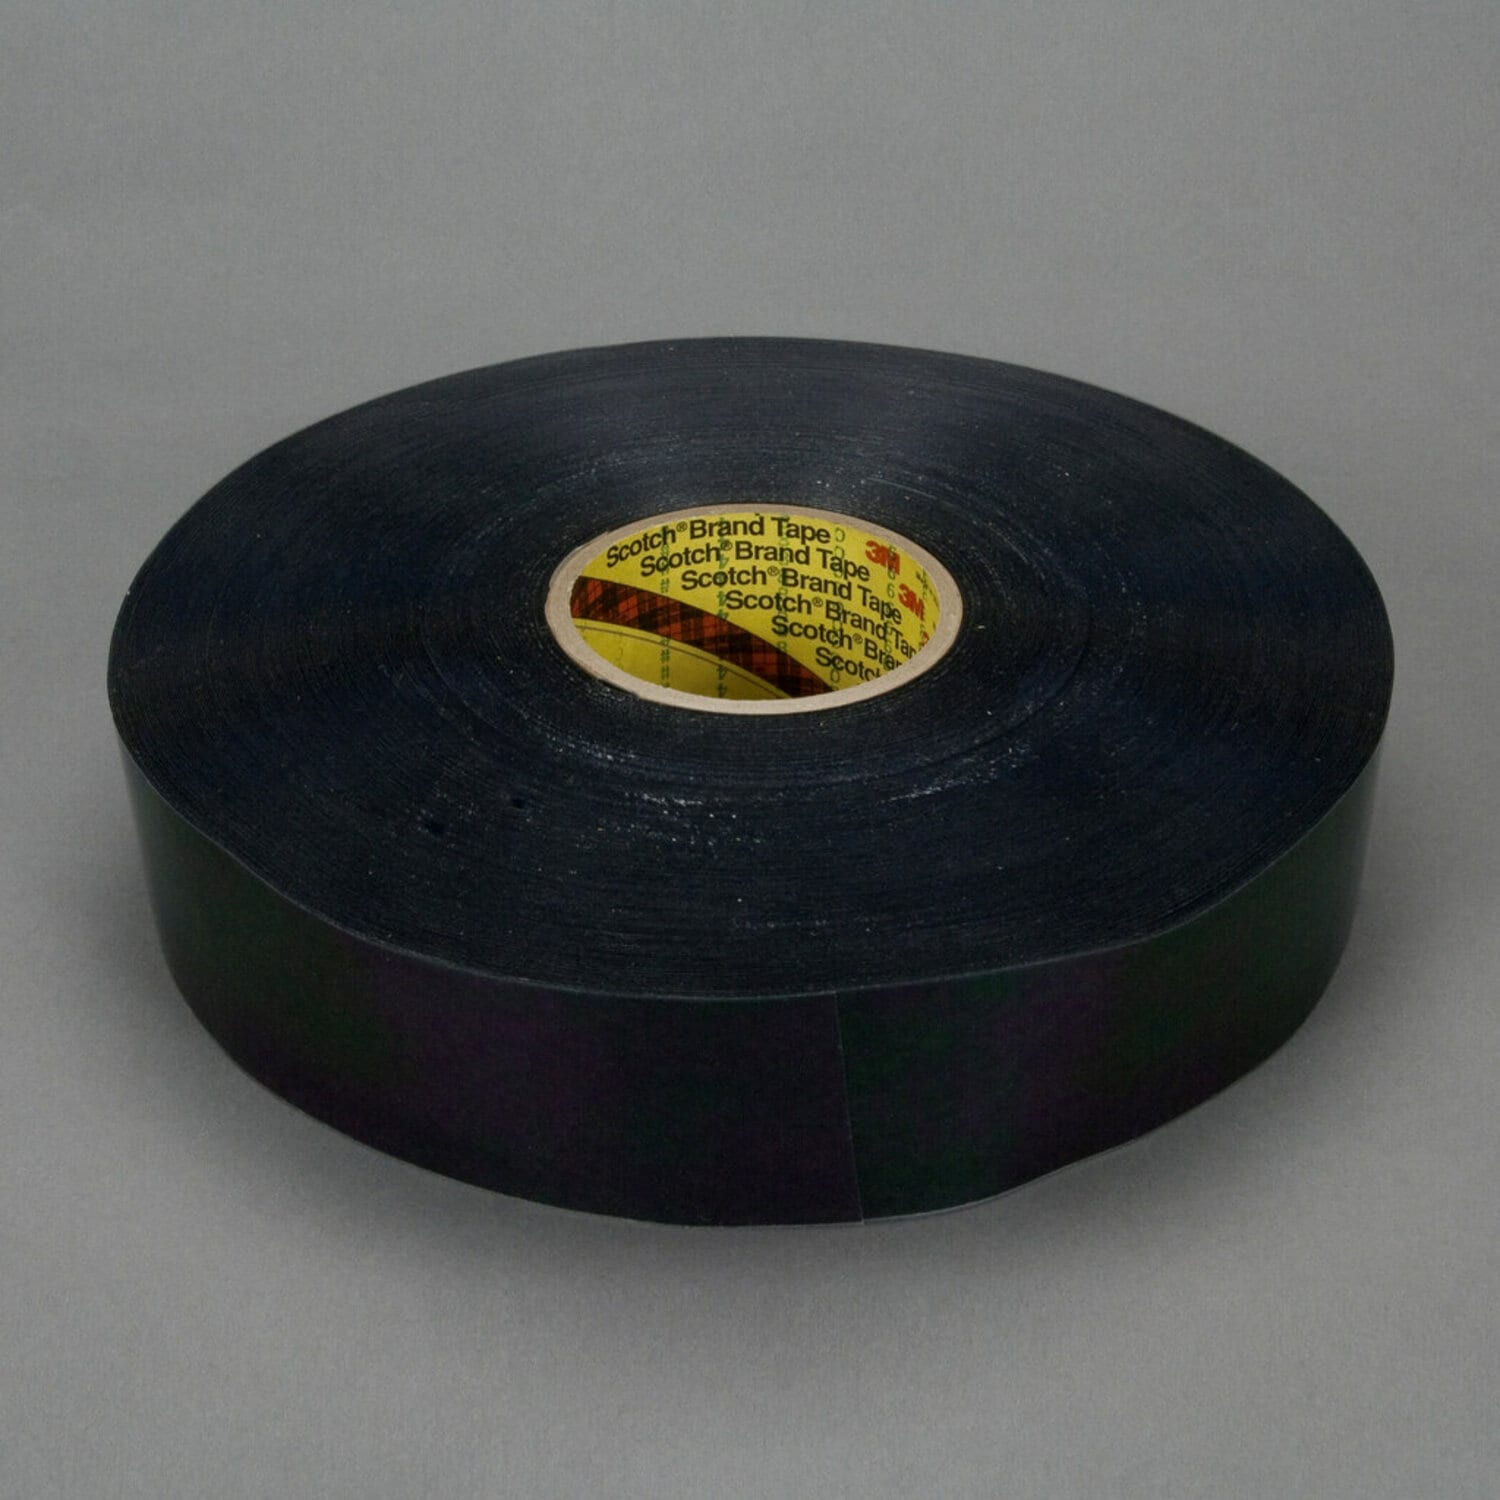 7010334496 - 3M Conformable Sound Management Film Tape 9343, Black, 13/32 in x 36
yd, 72 rolls per case